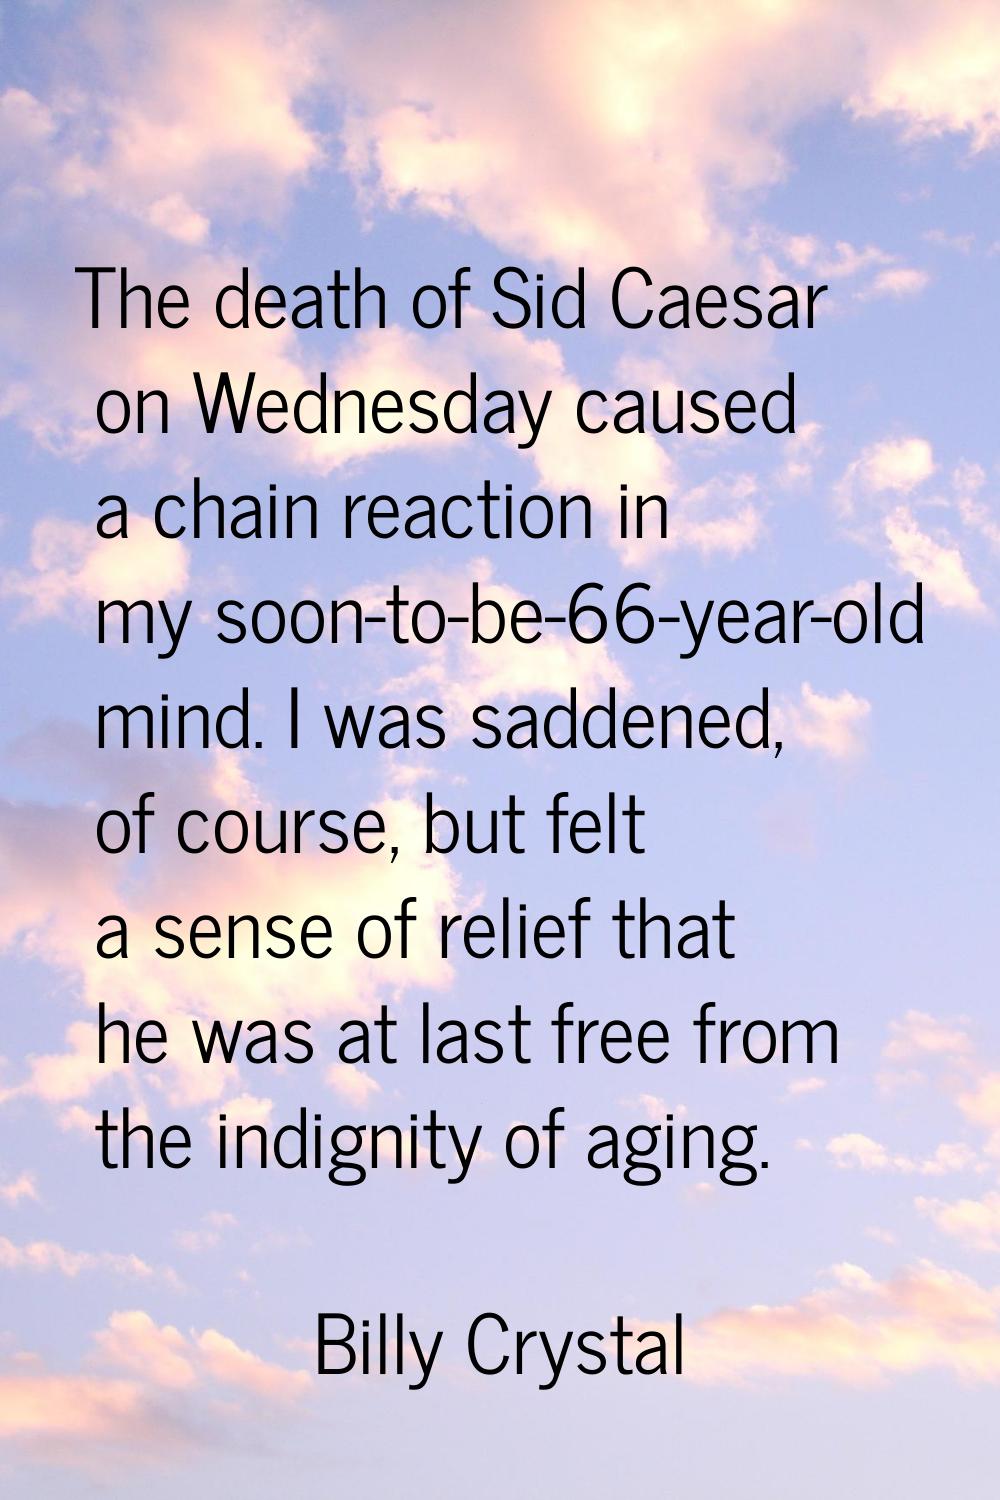 The death of Sid Caesar on Wednesday caused a chain reaction in my soon-to-be-66-year-old mind. I w